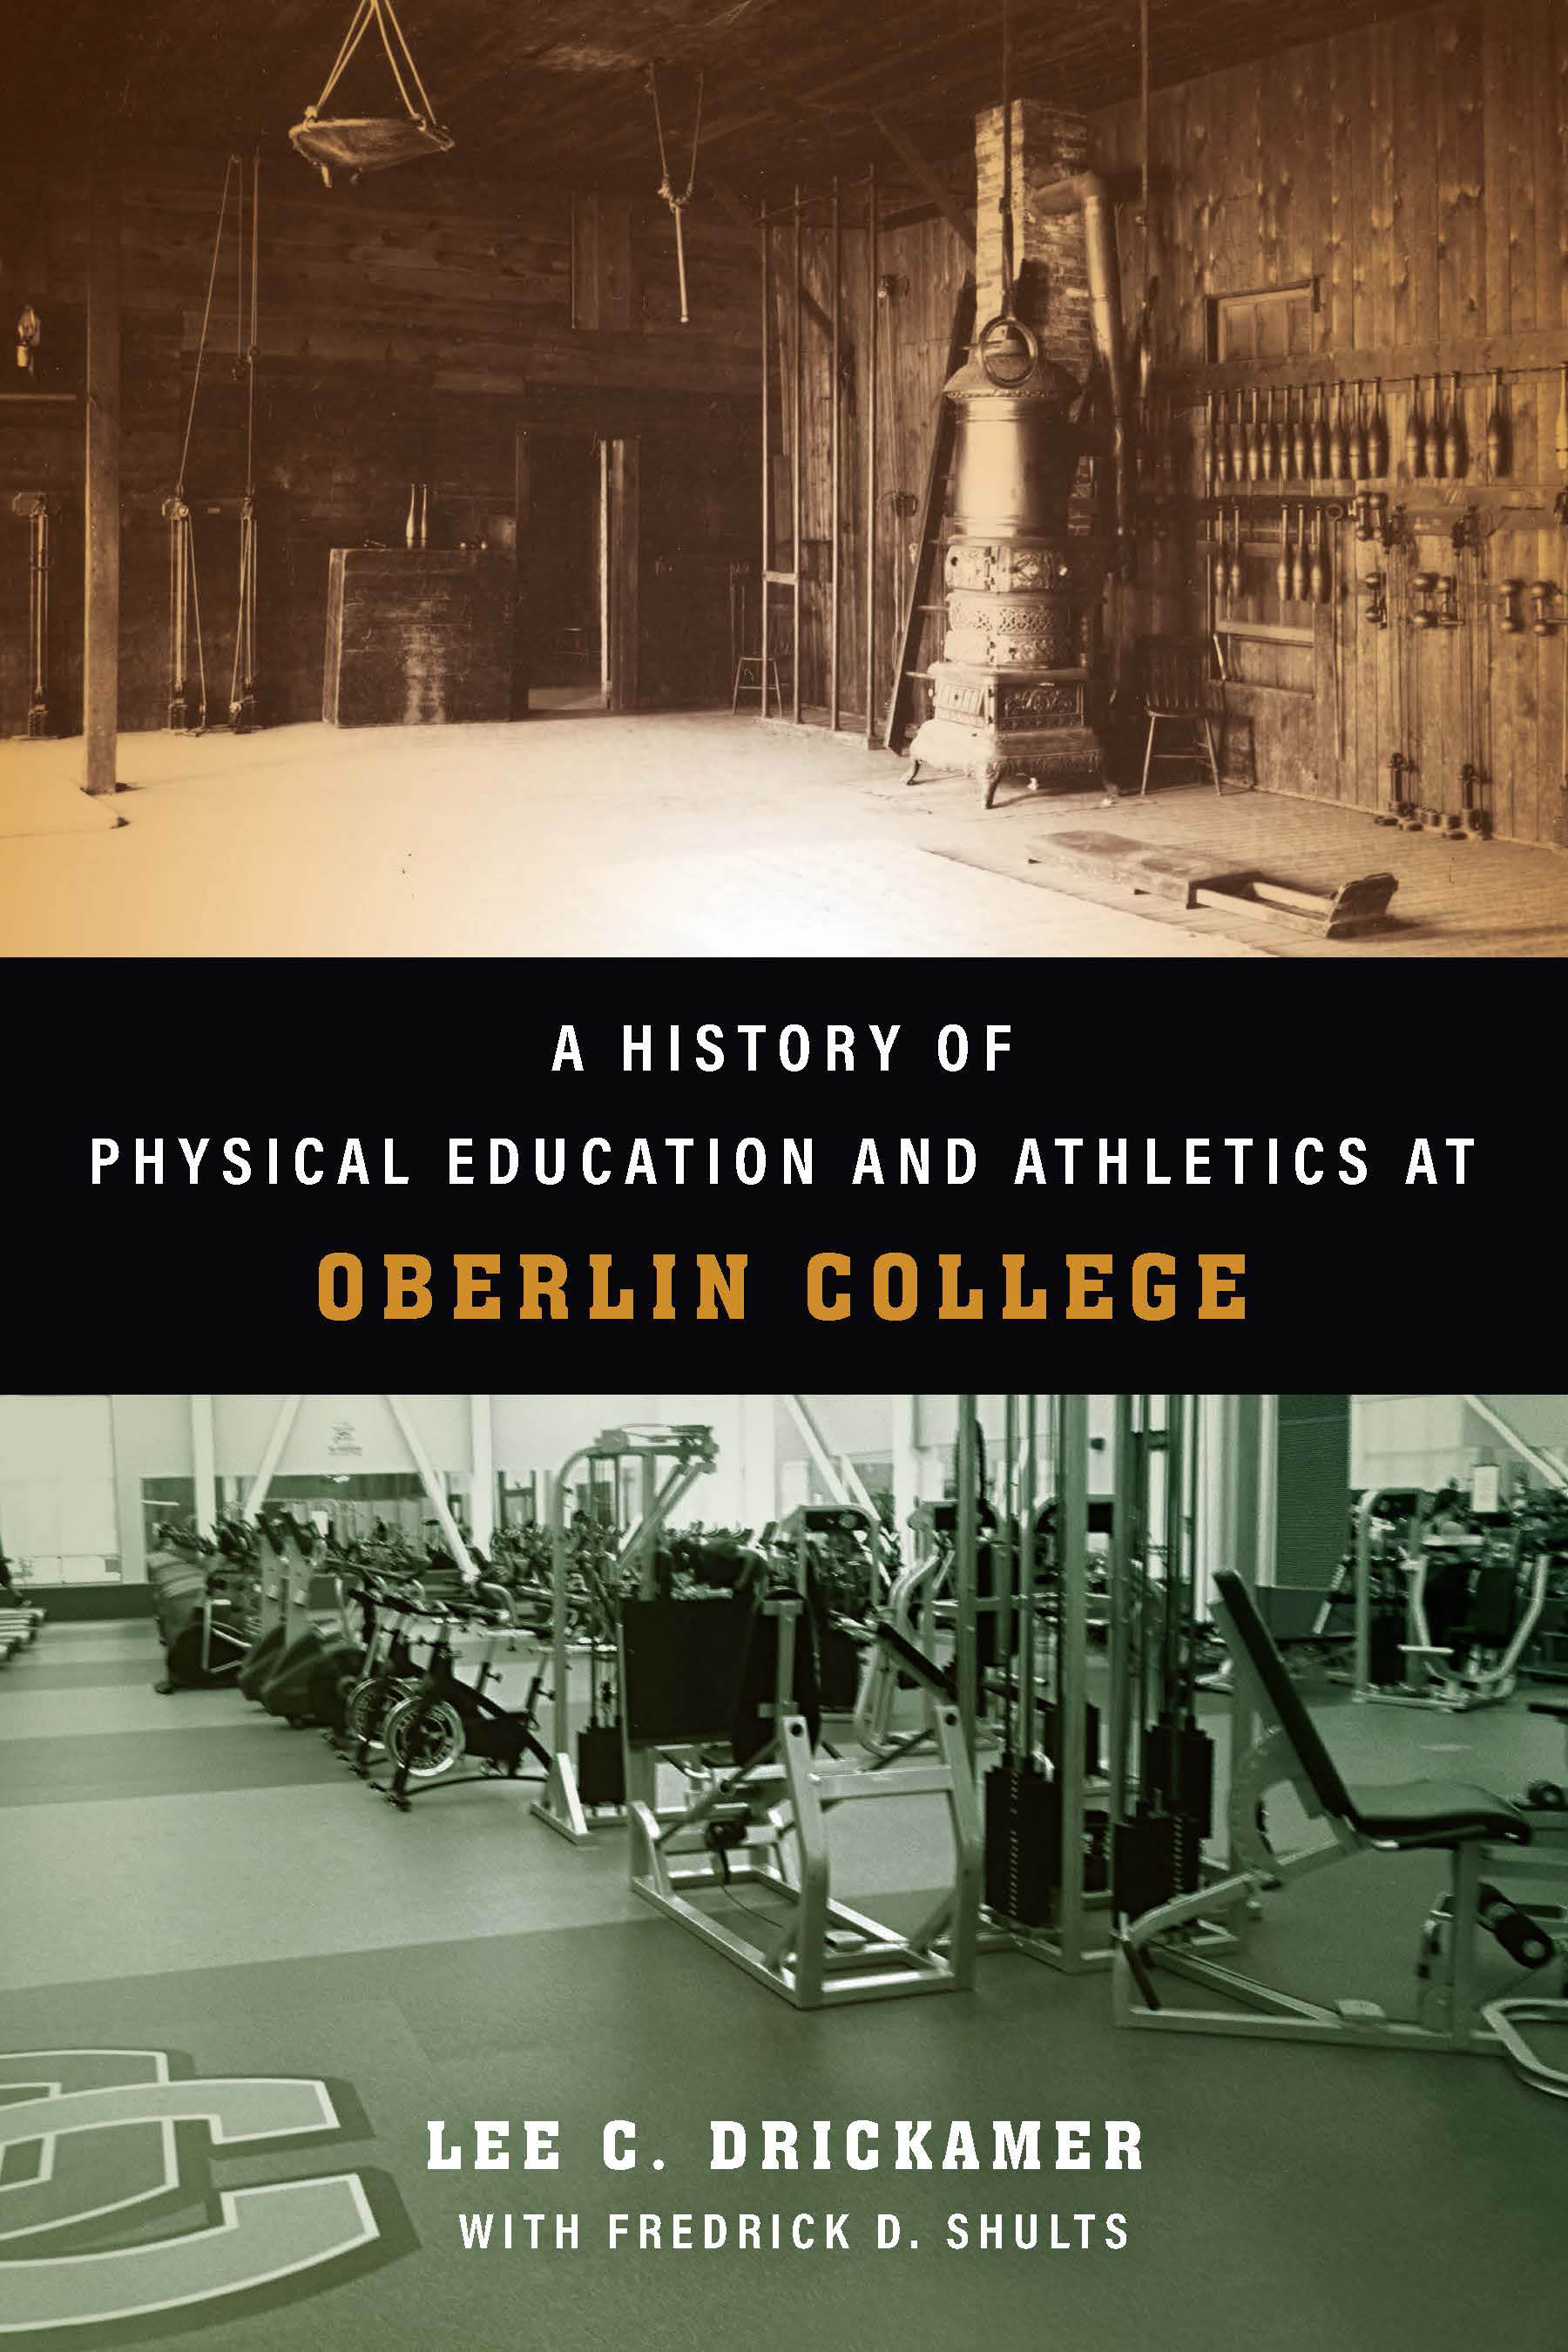 A History of Physical Education and Athletics at Oberlin